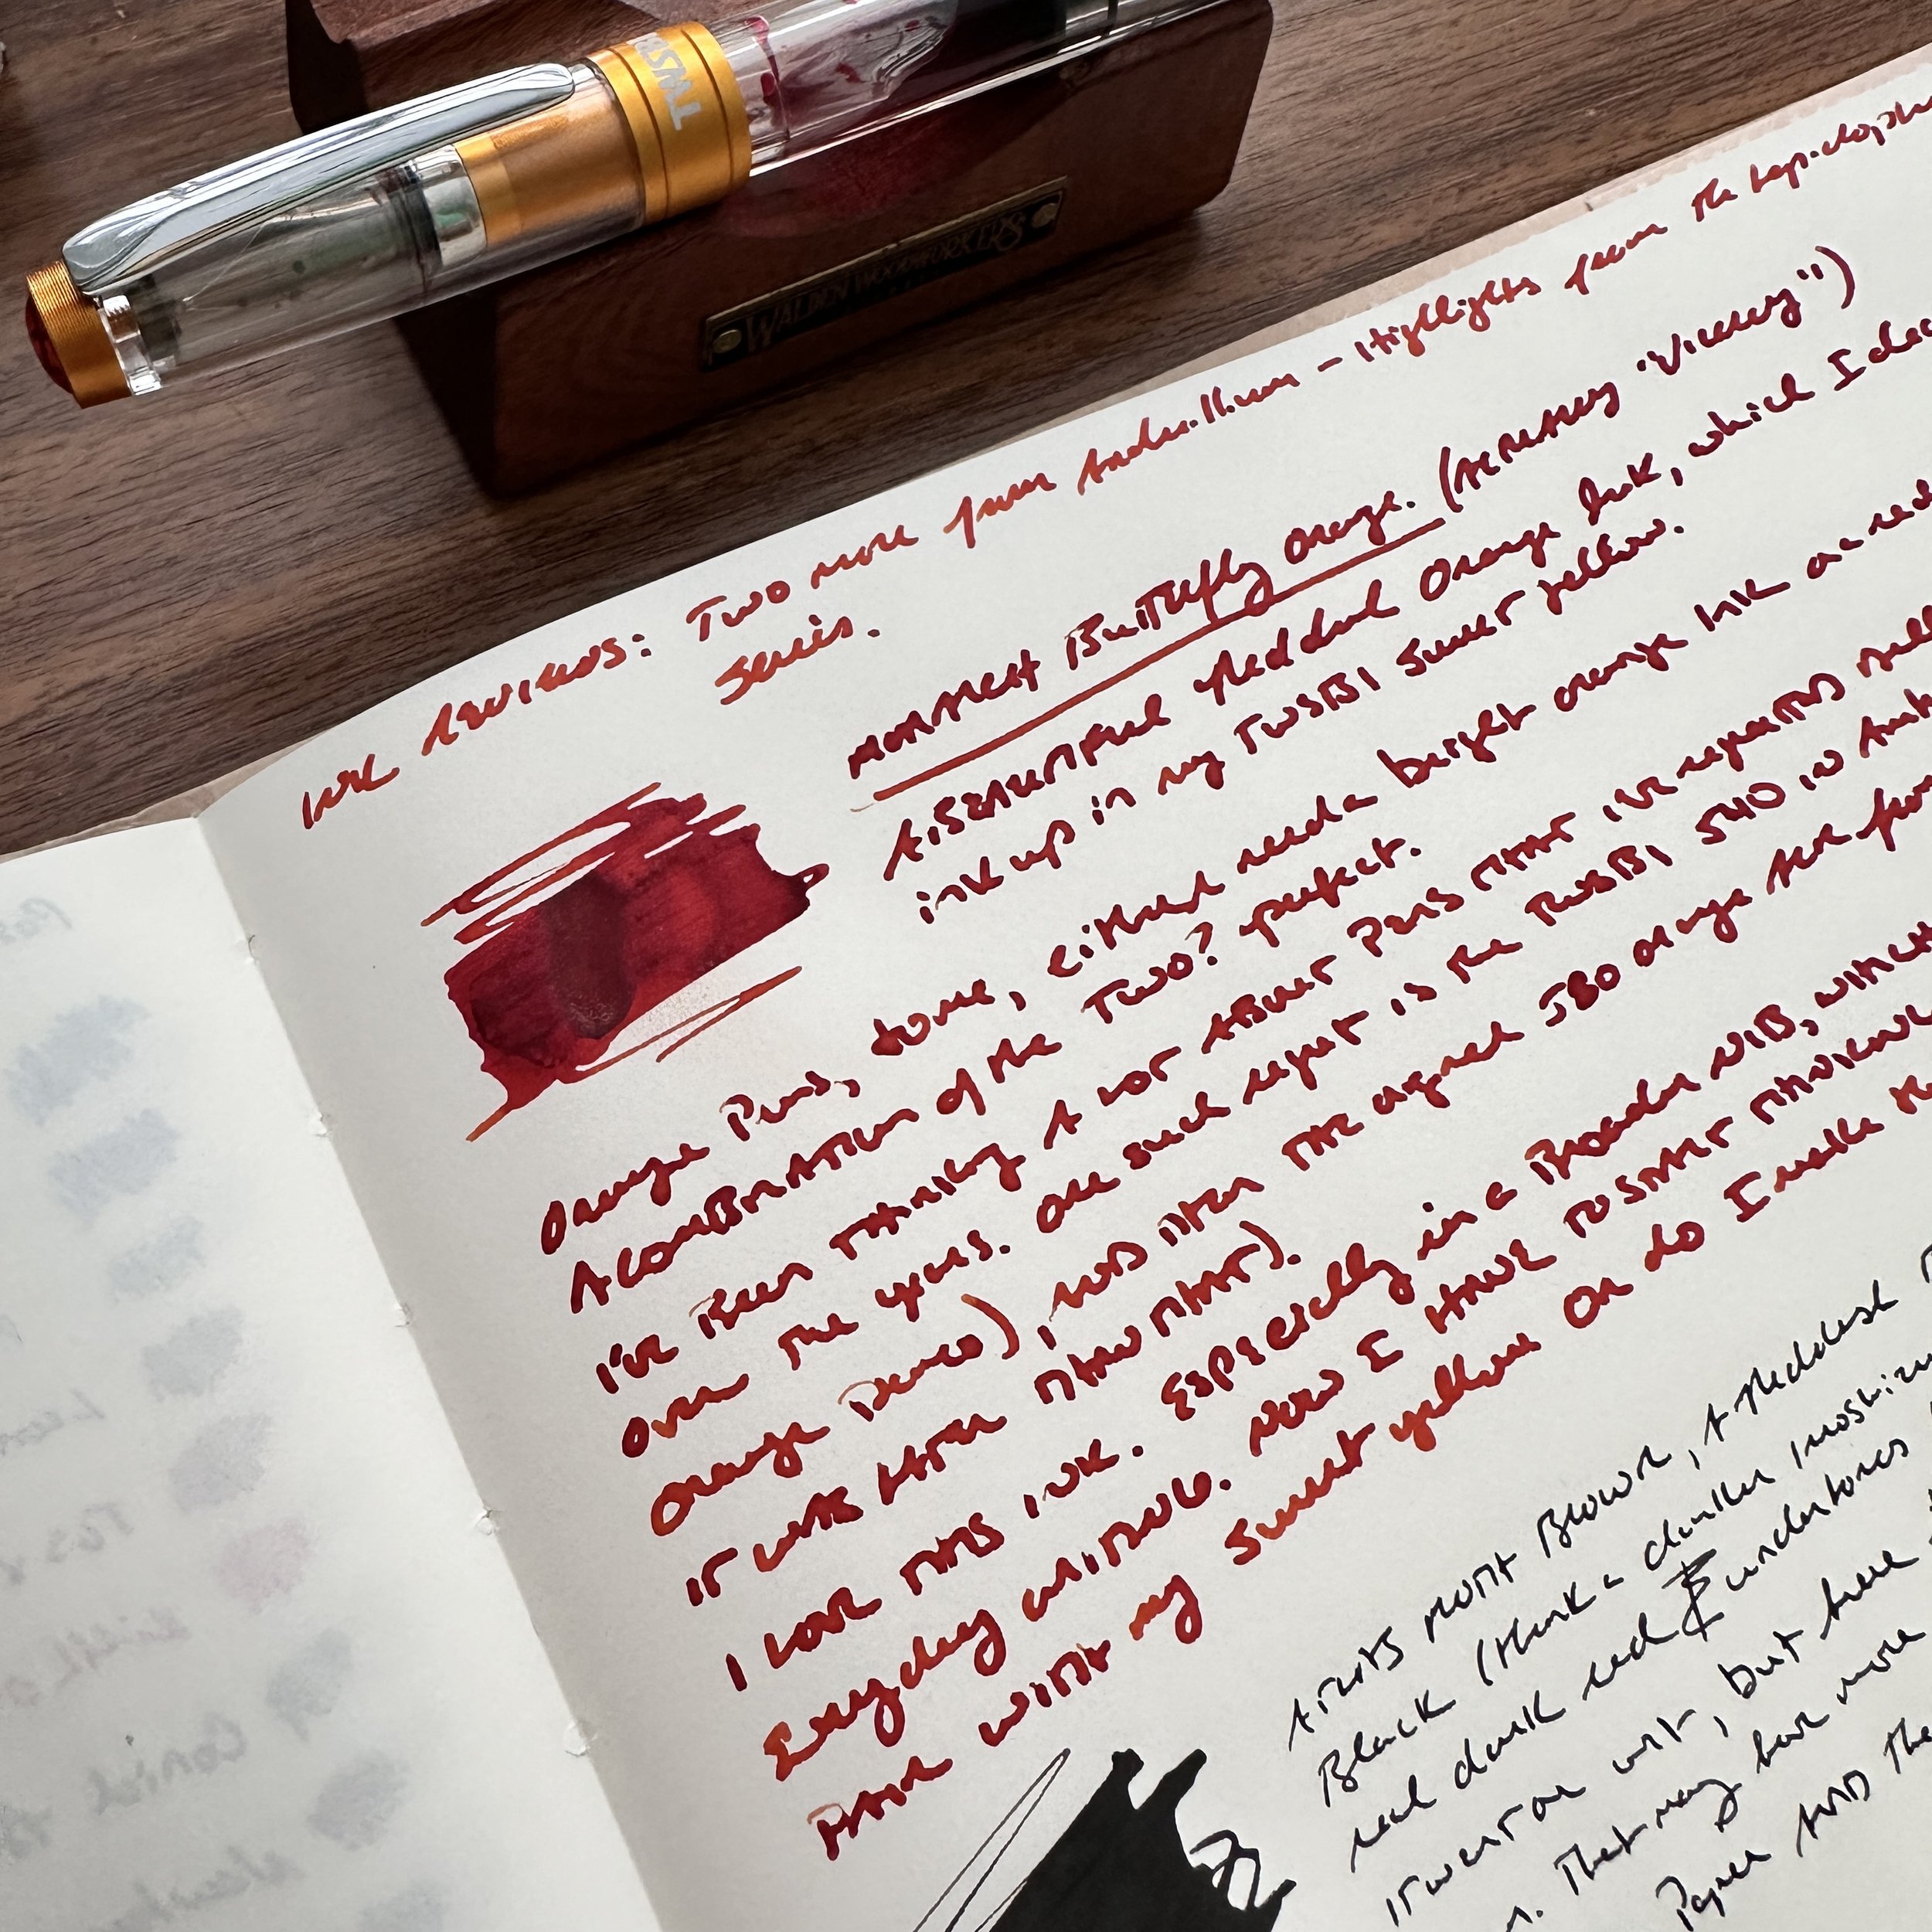 Fountain Pen Ink Review: A collection of yellows. - The Well-Appointed Desk